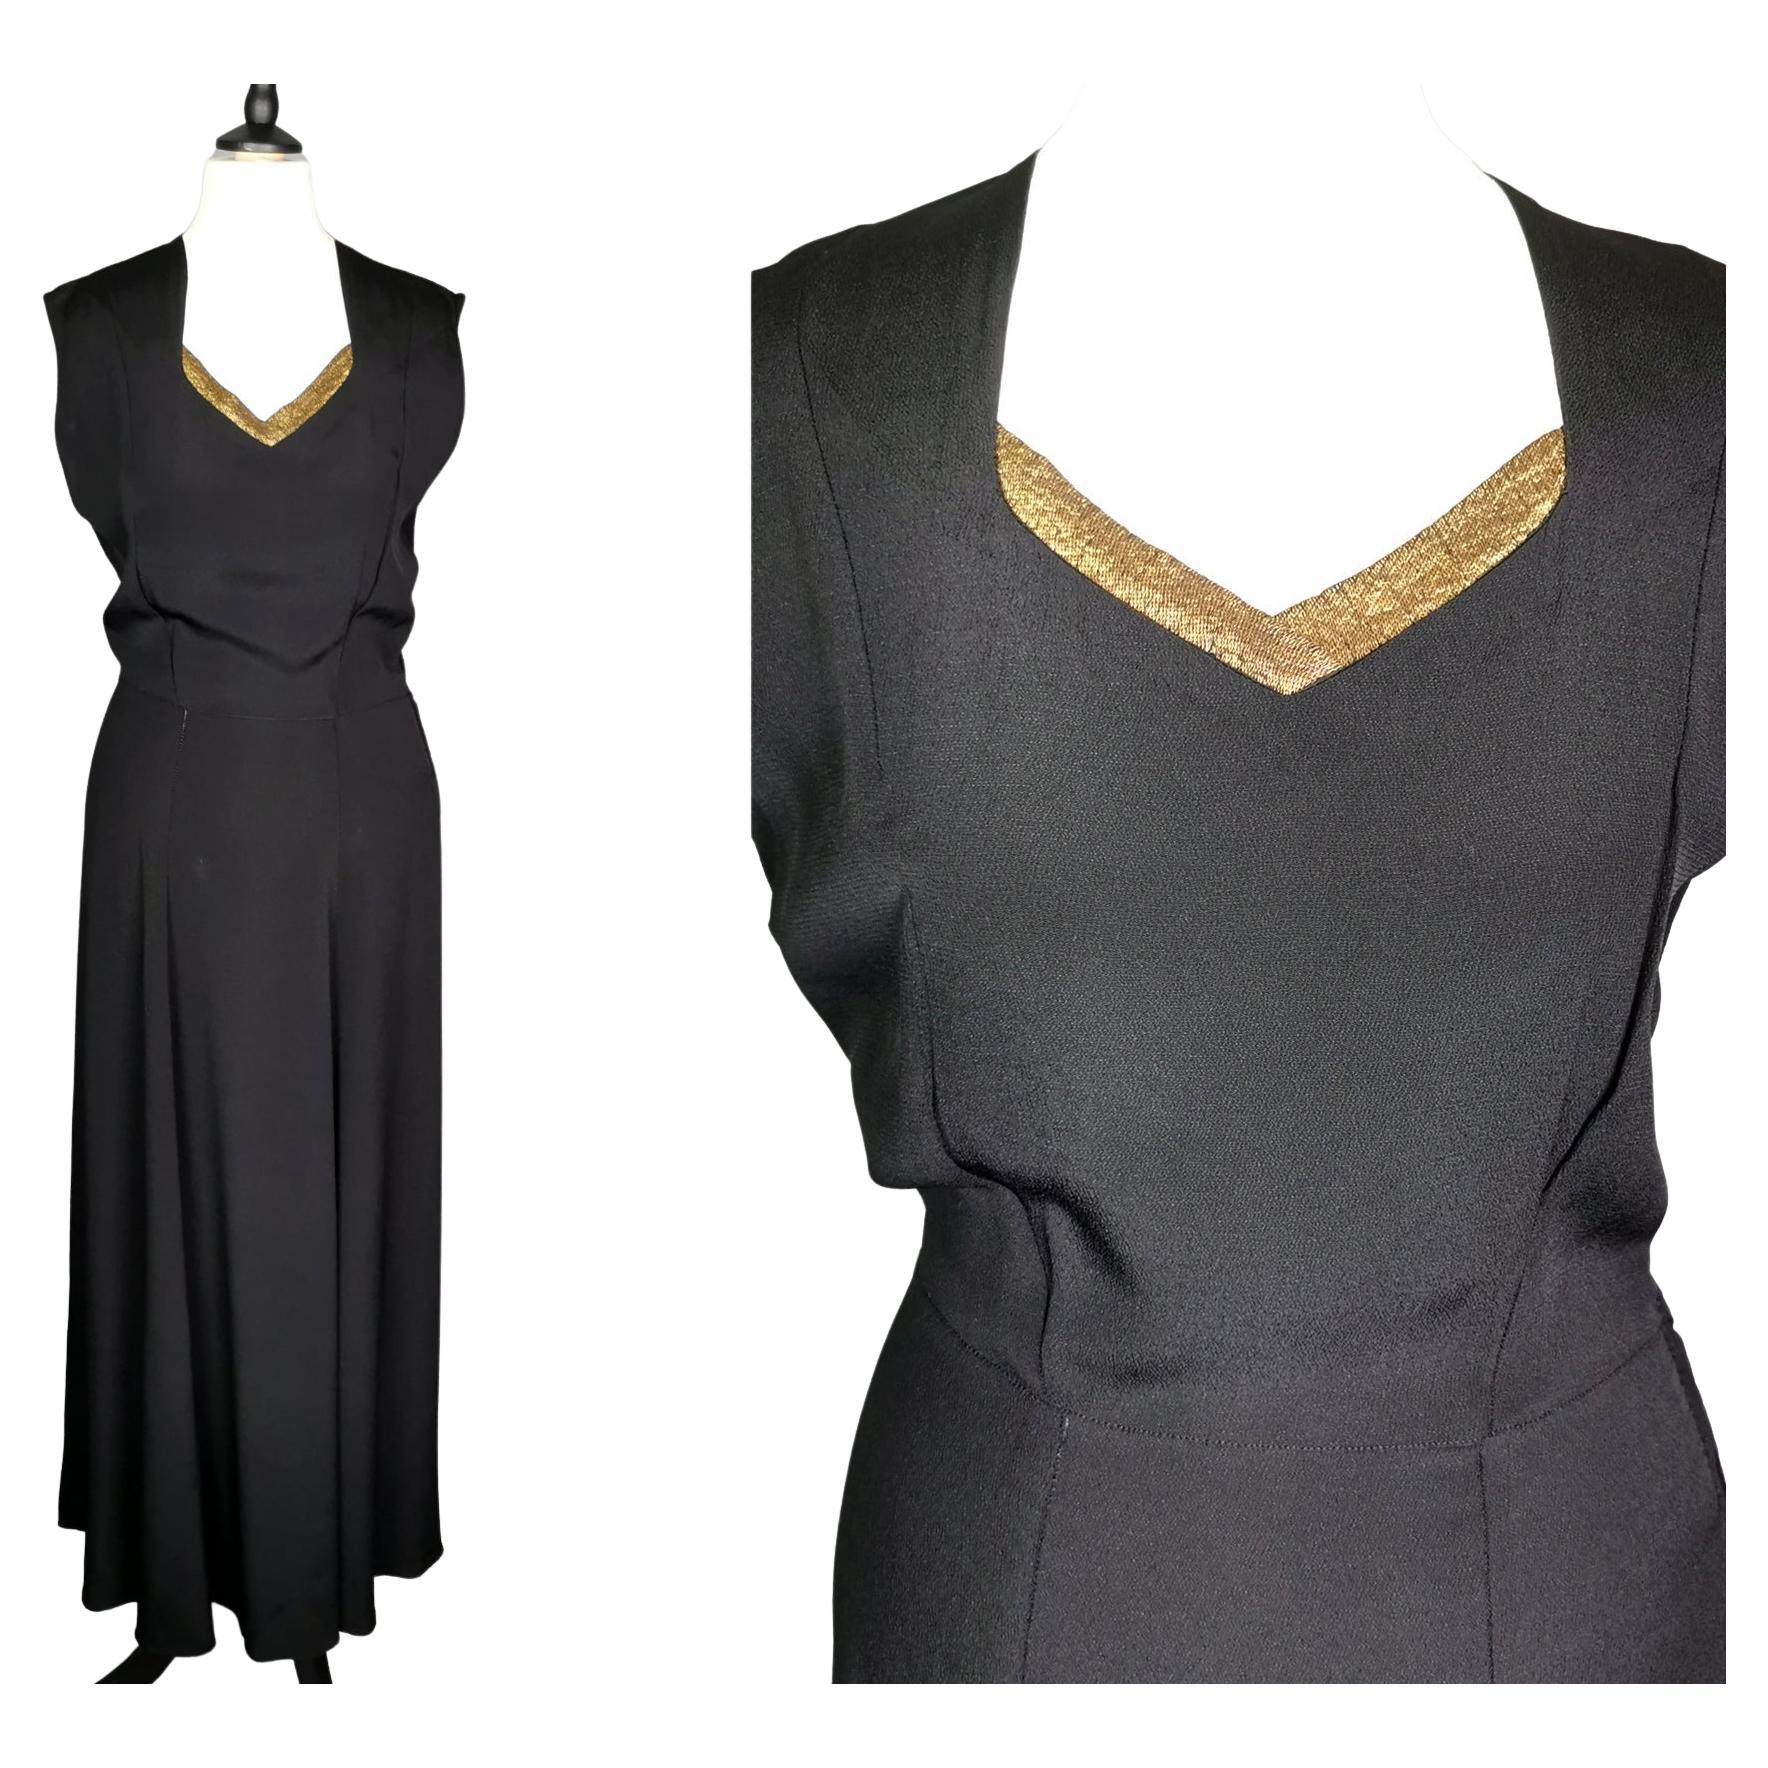 Vintage 1930s Black rayon crepe bombshell dress, gold lame, evening gown  For Sale